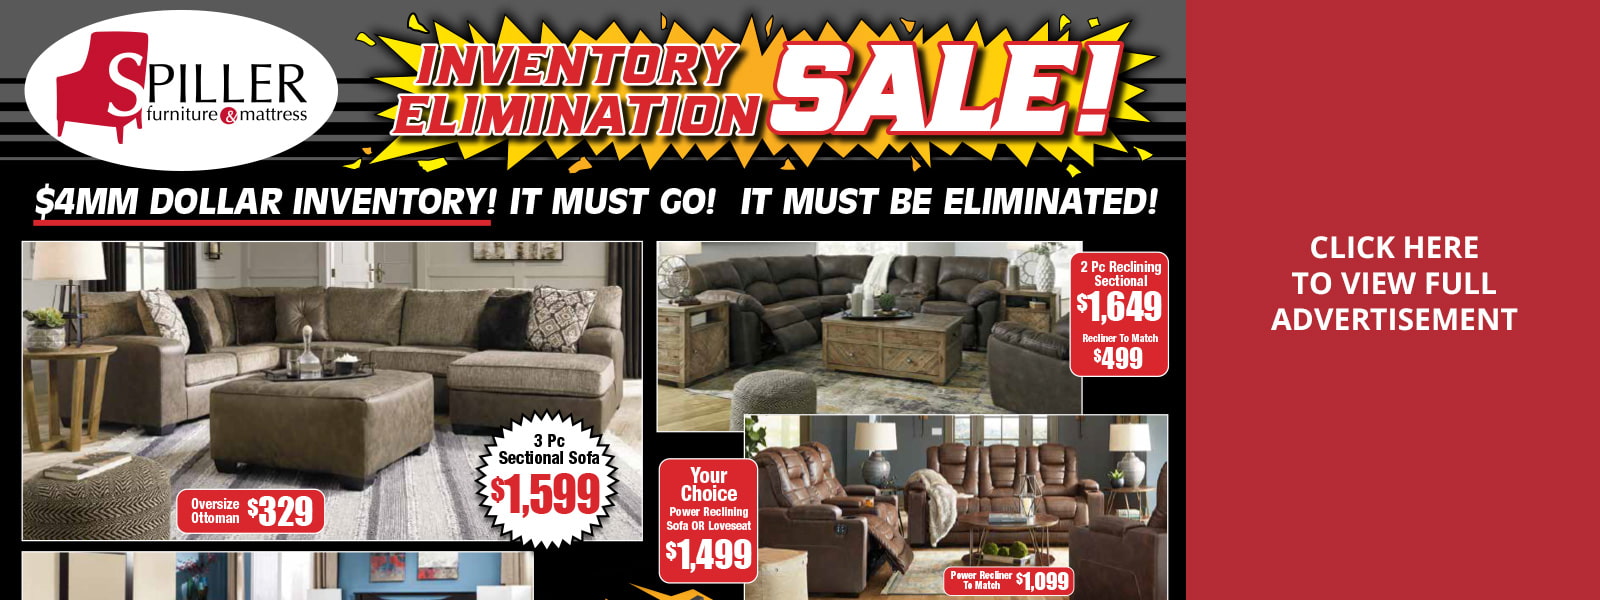 Inventory Elimination Sale - $4MM Dollar Inventory! It Must Go!